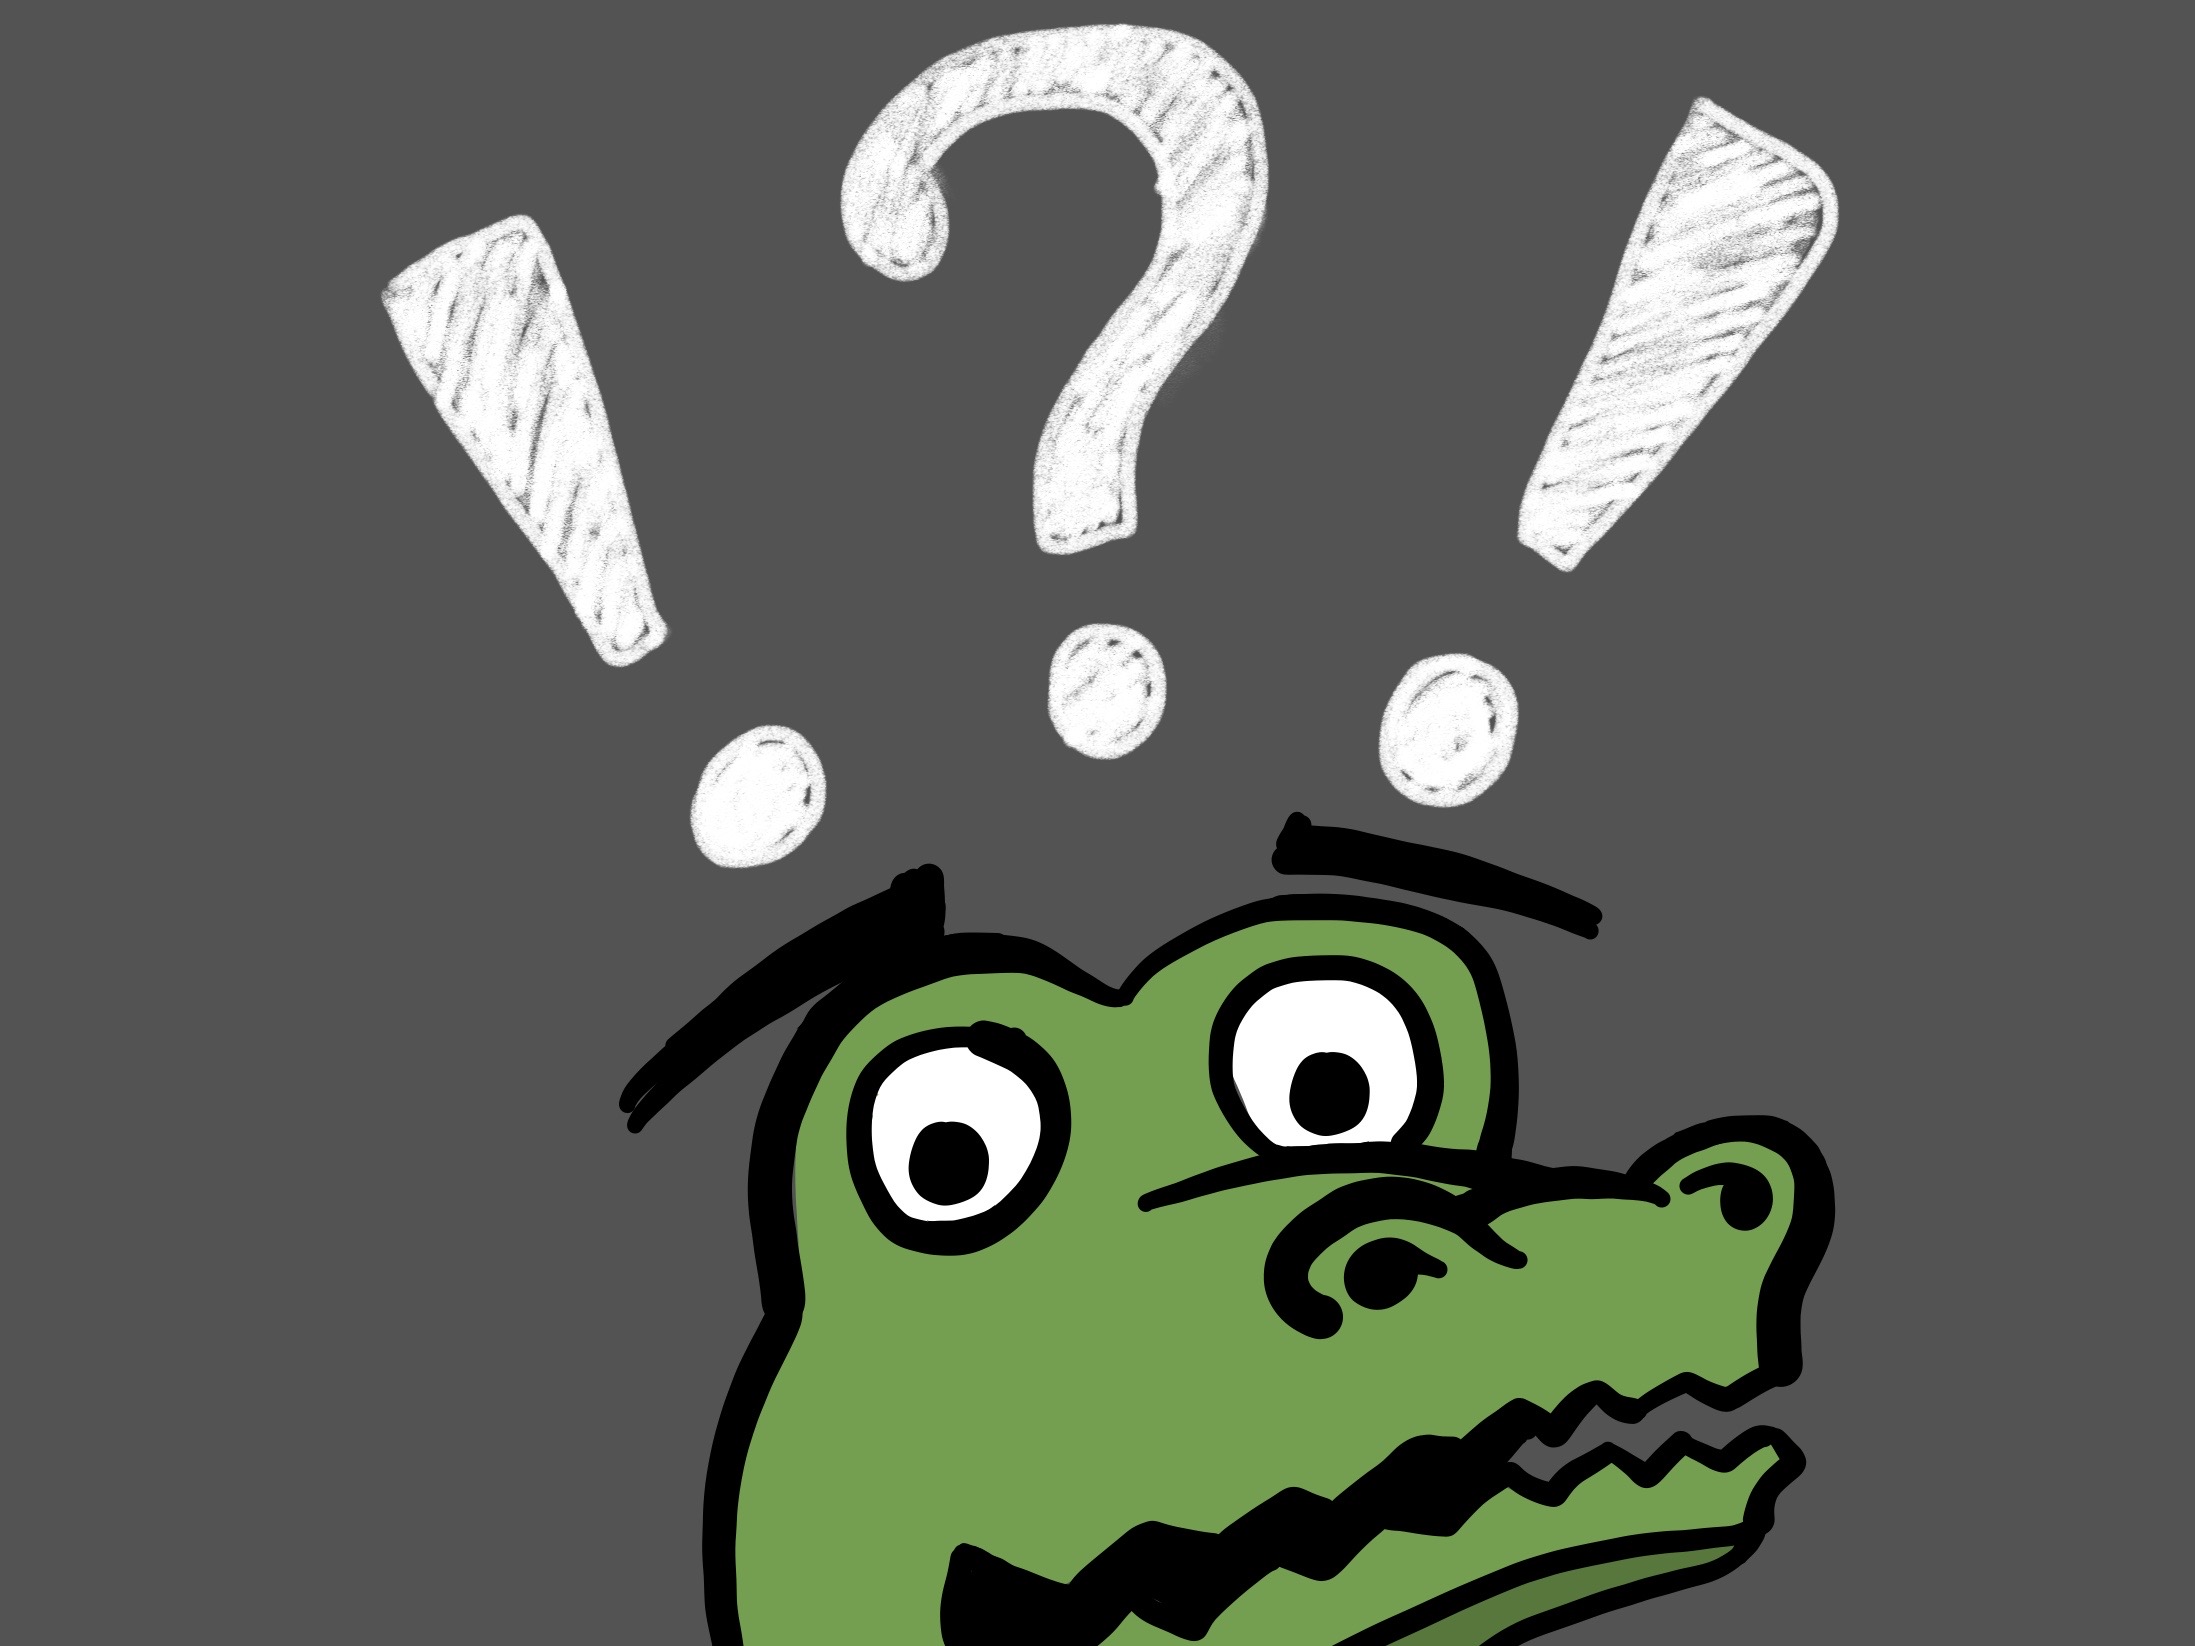 Cartoon gator head with a question mark and two exclamation points above his head